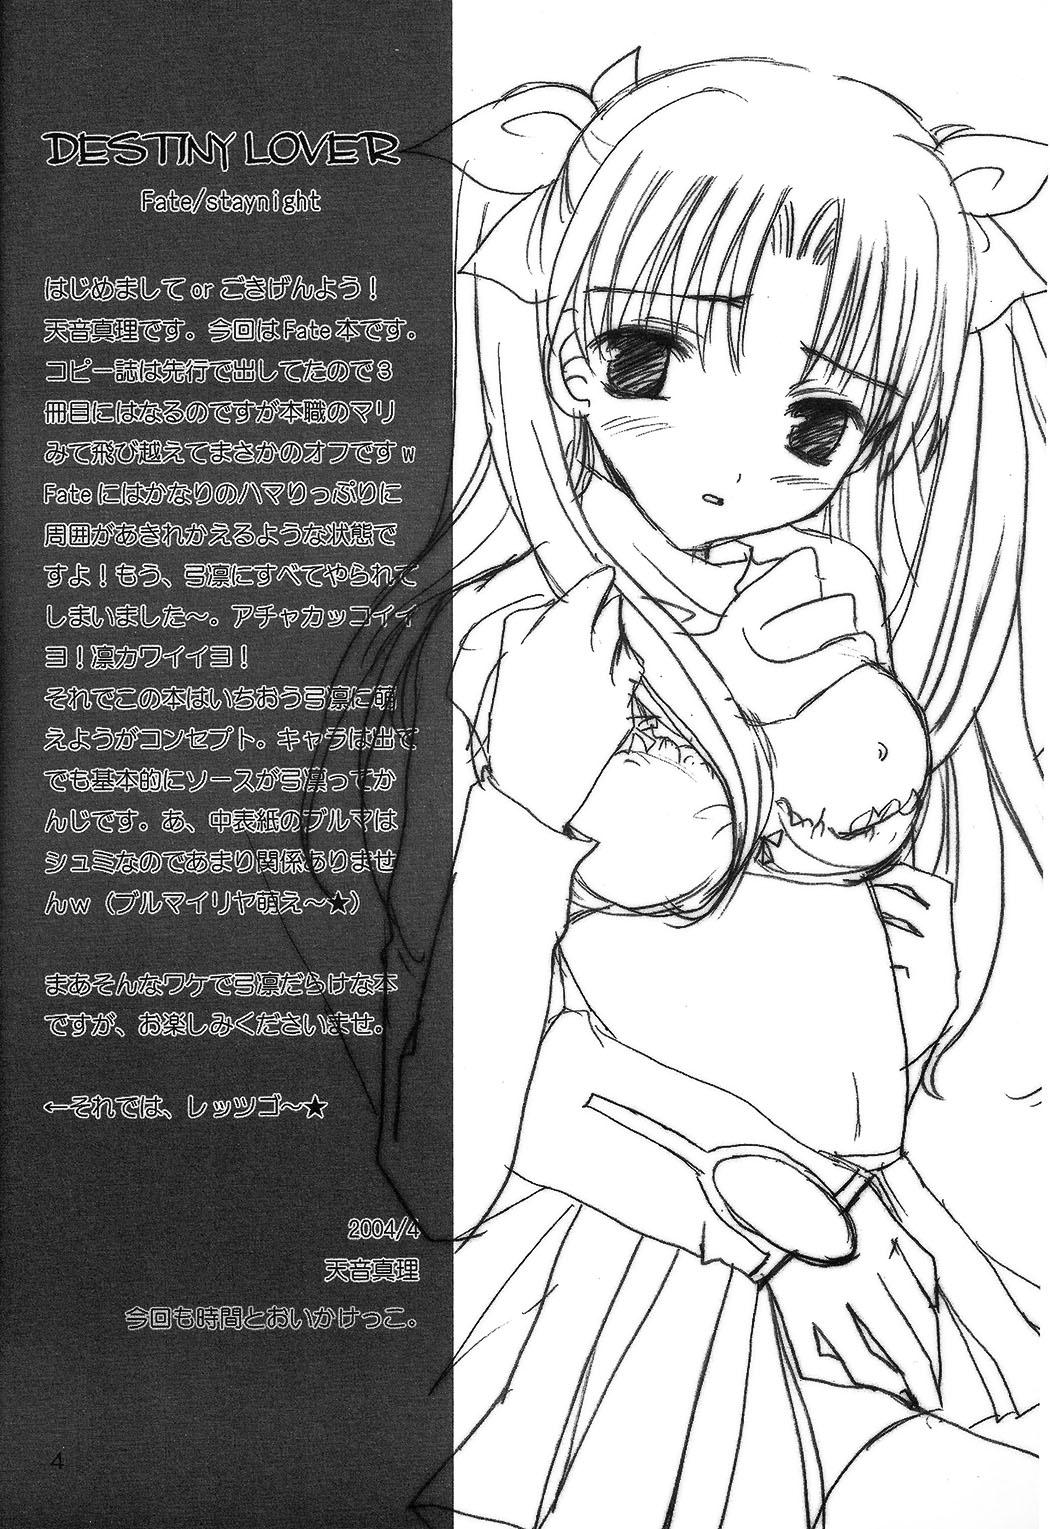 Celebrity Sex DESTINY LOVER - Fate stay night Ikillitts - Page 2